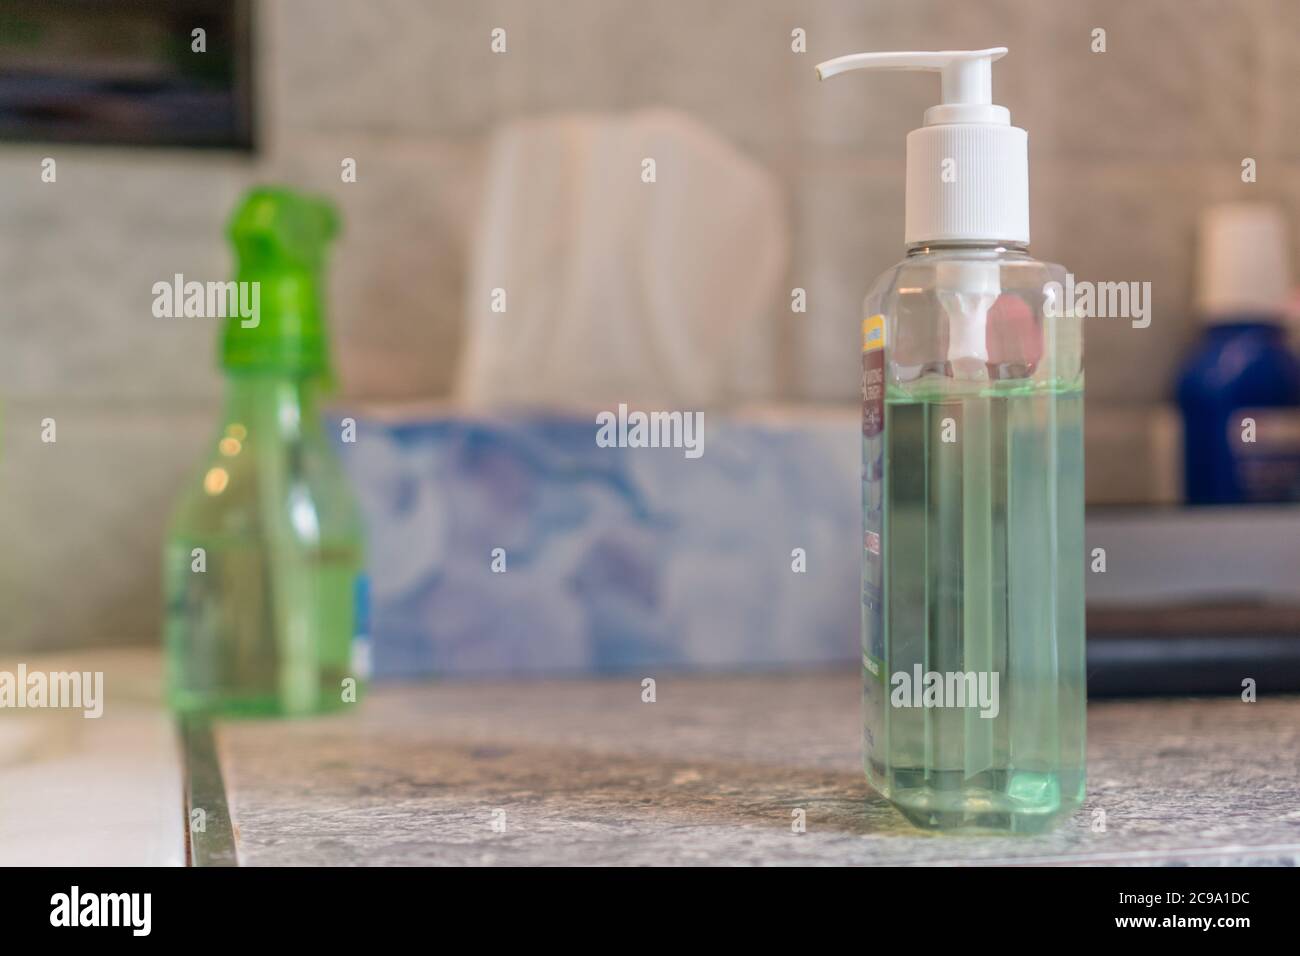 Close-up of bottle of hand sanitizer in home bathroom Stock Photo